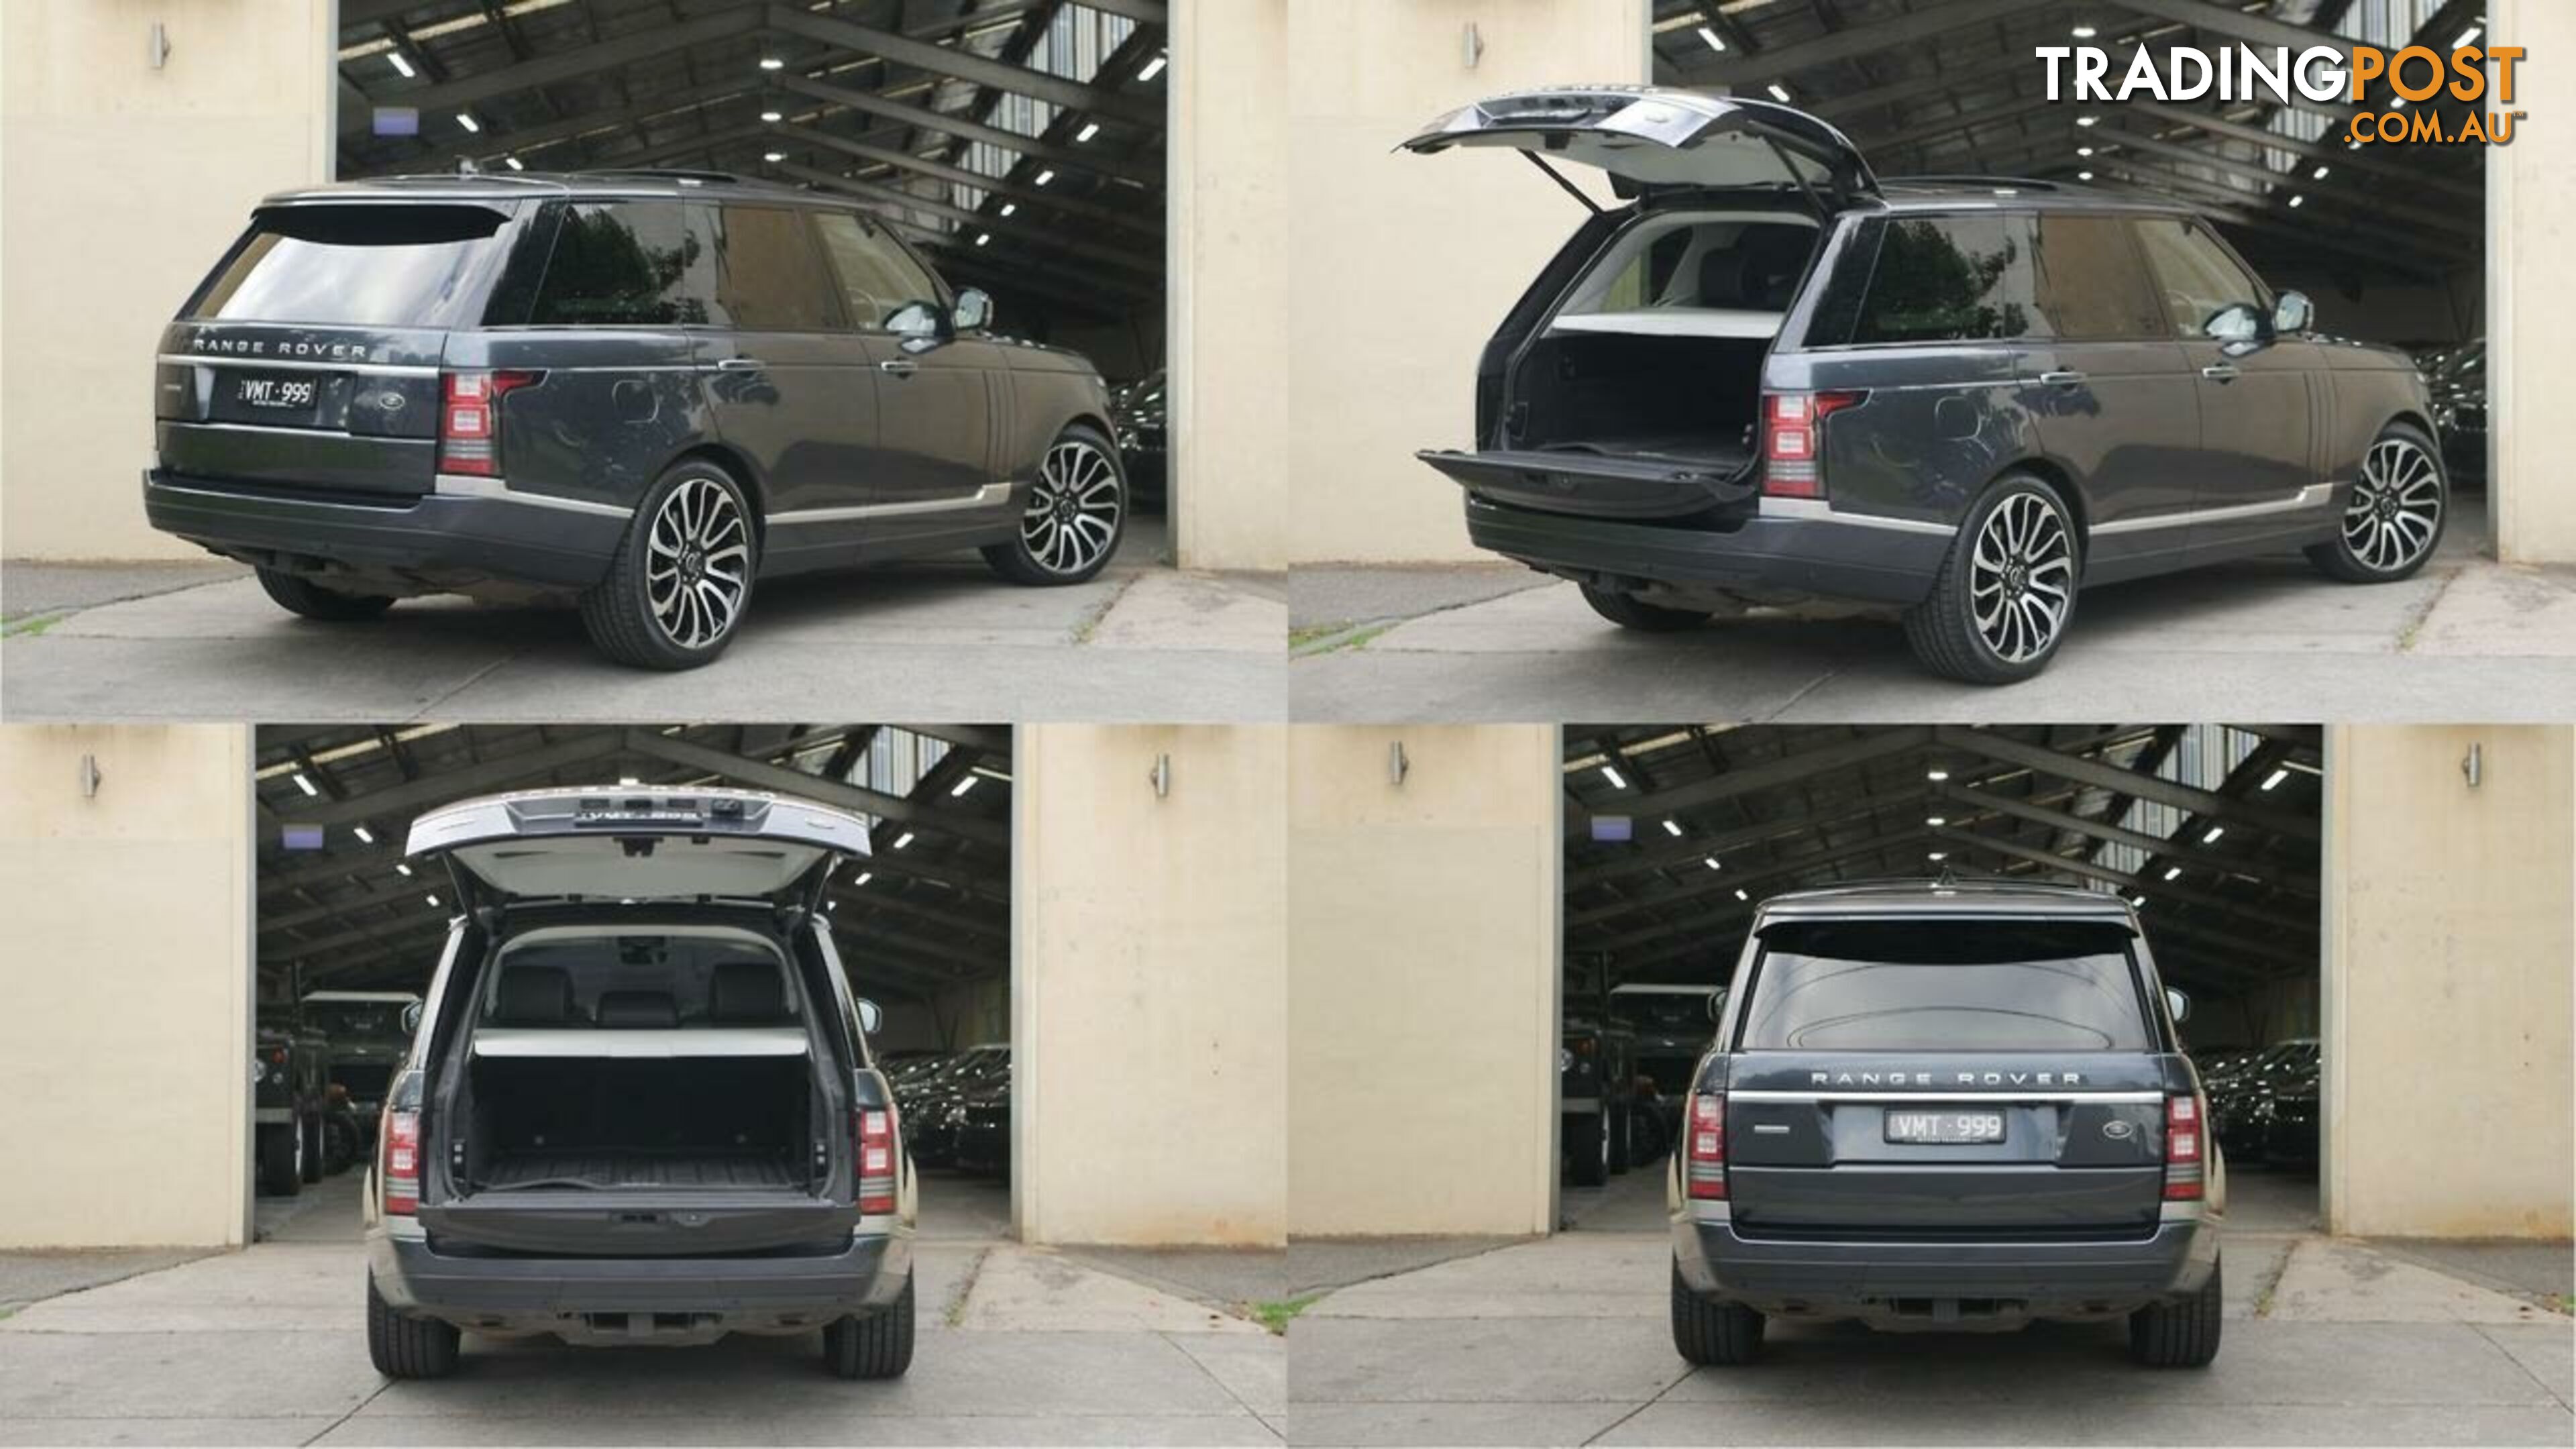 2017 Land Rover Range Rover  L405 17MY Autobiography Wagon